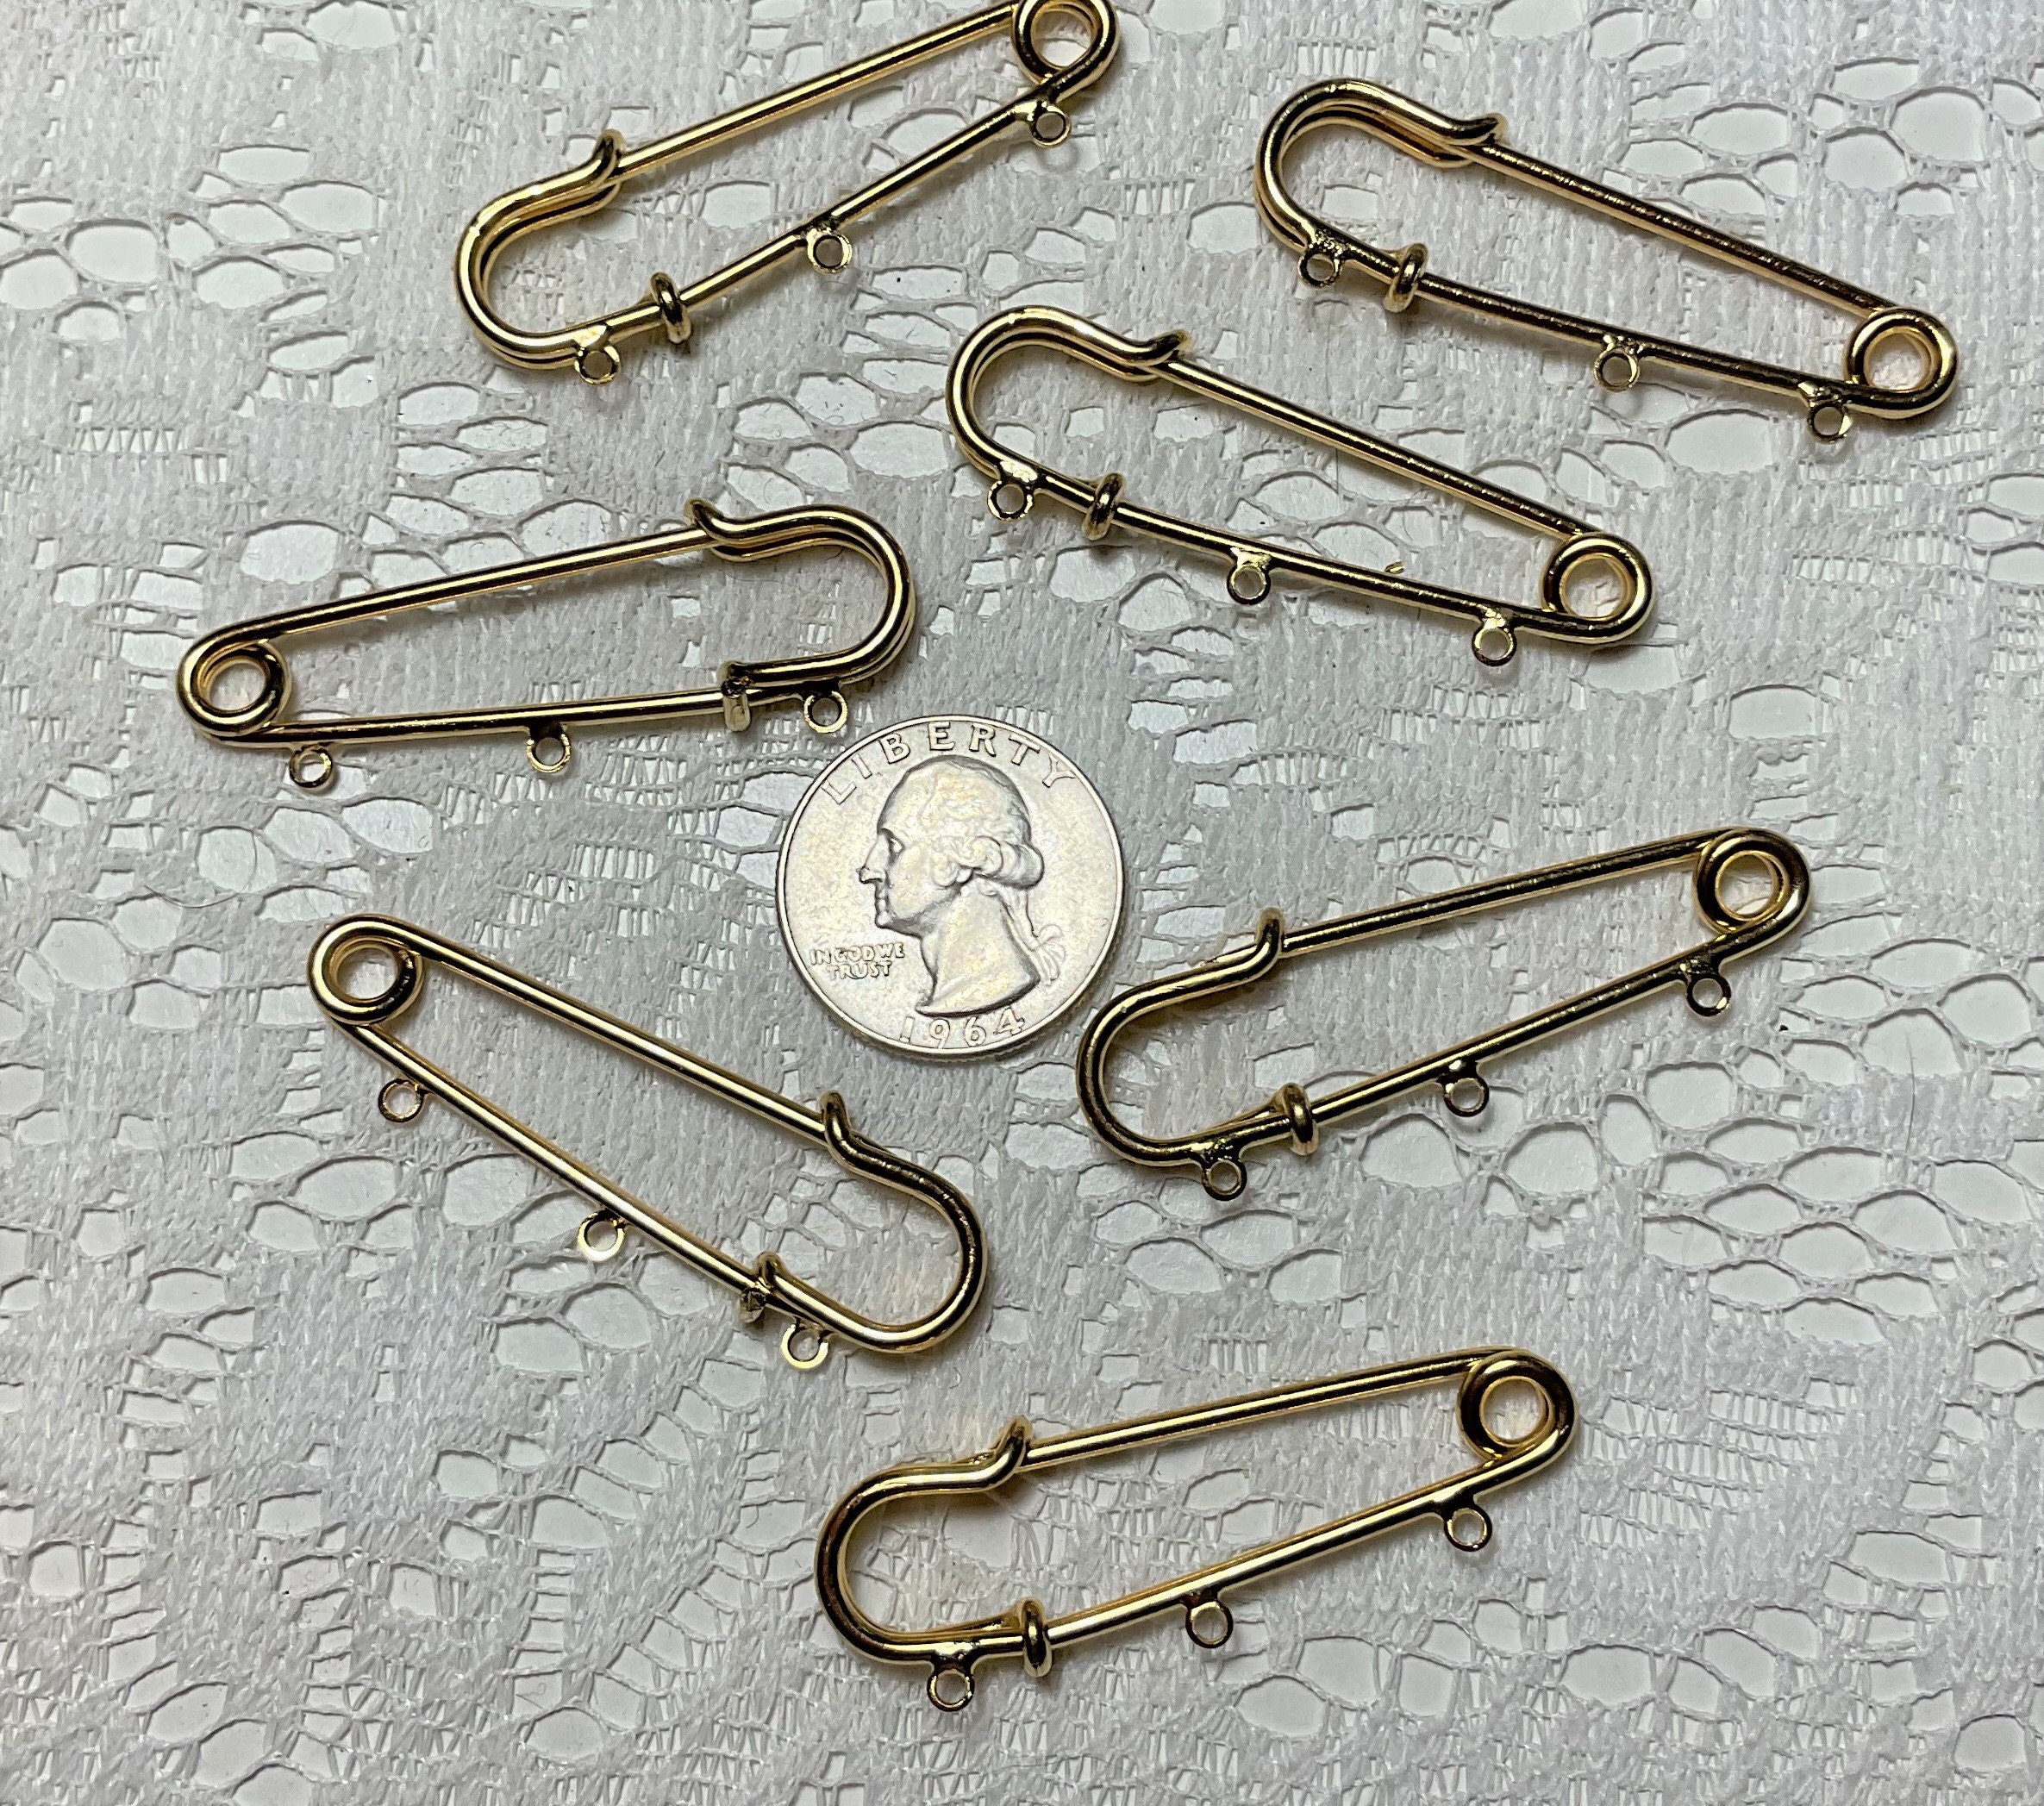 Tool Gadget Large Safety Pins, 3inch Safety Pins, 2pcs Stainless Steel Safety Pins Large, Silver Huge Strong Safety Pins, Extra Large Laundry Pins for